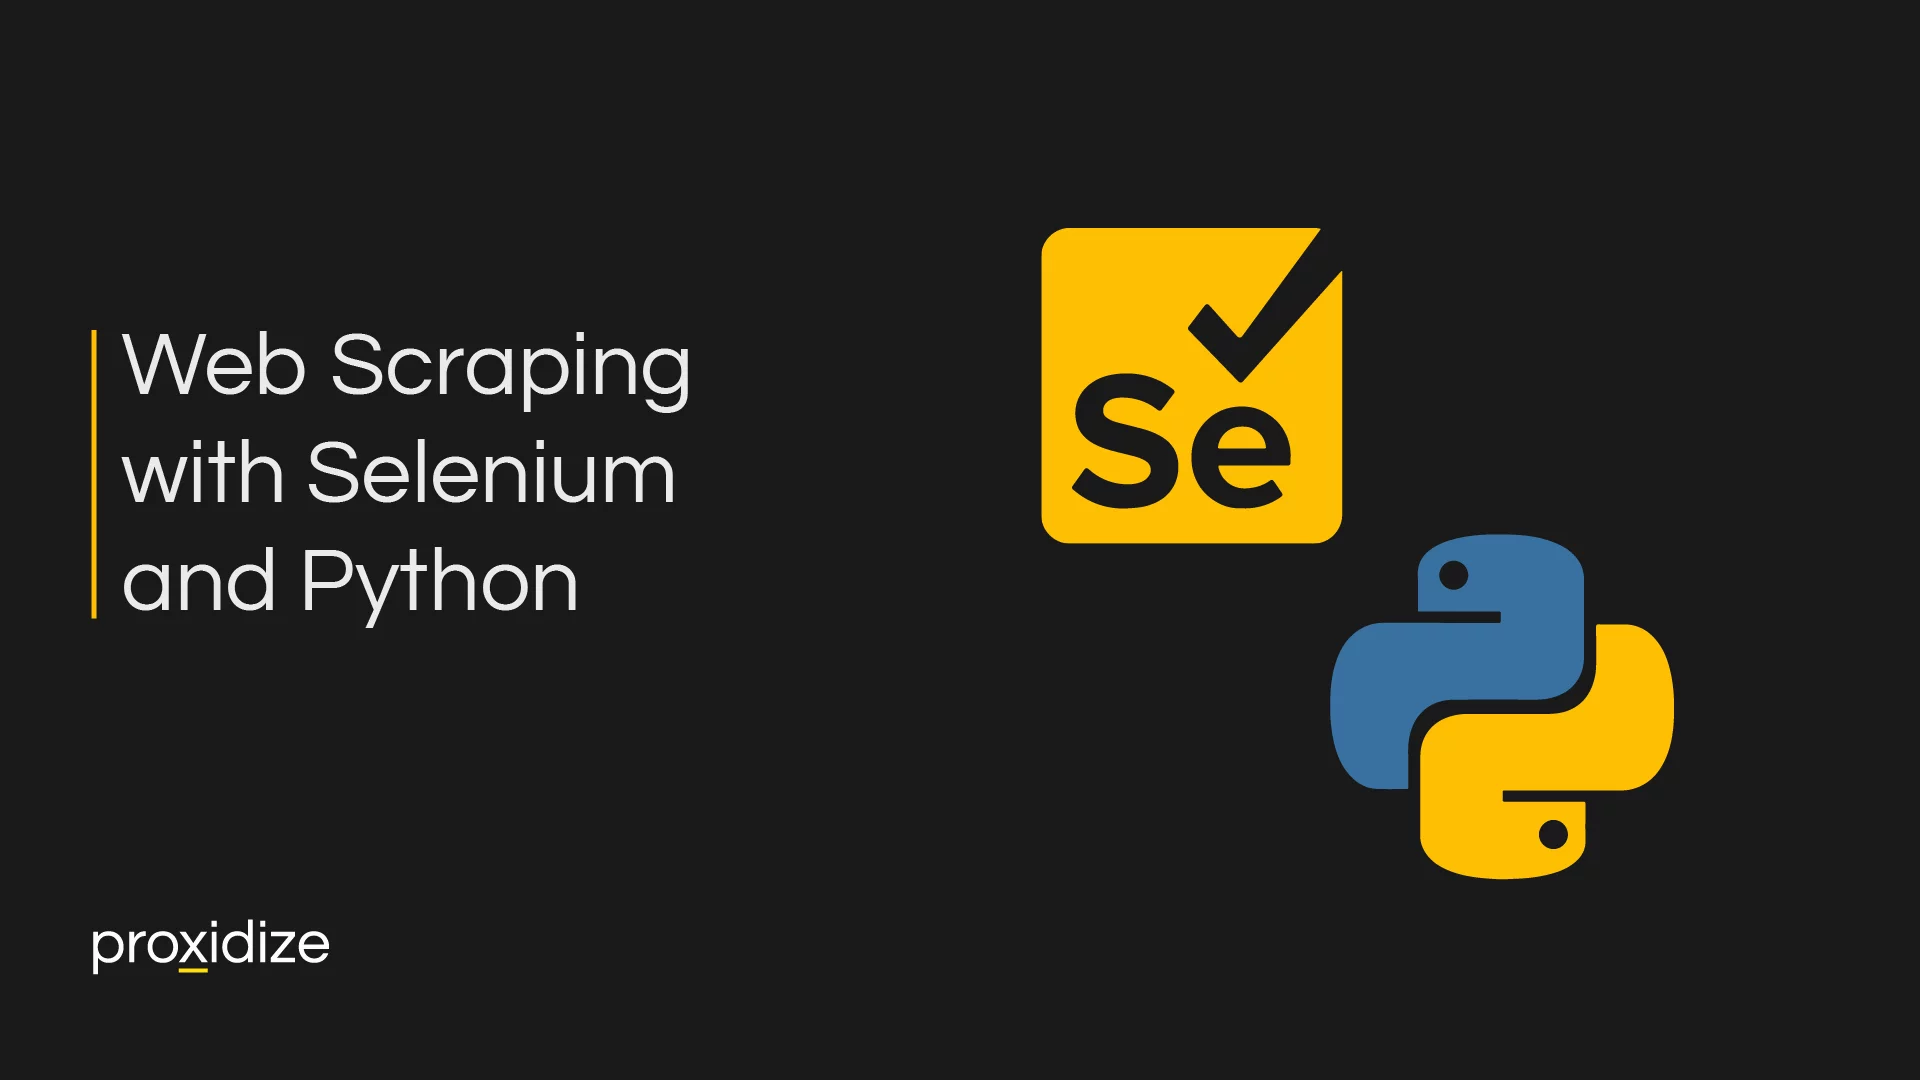 Logos of Selenium and Python next to the title 